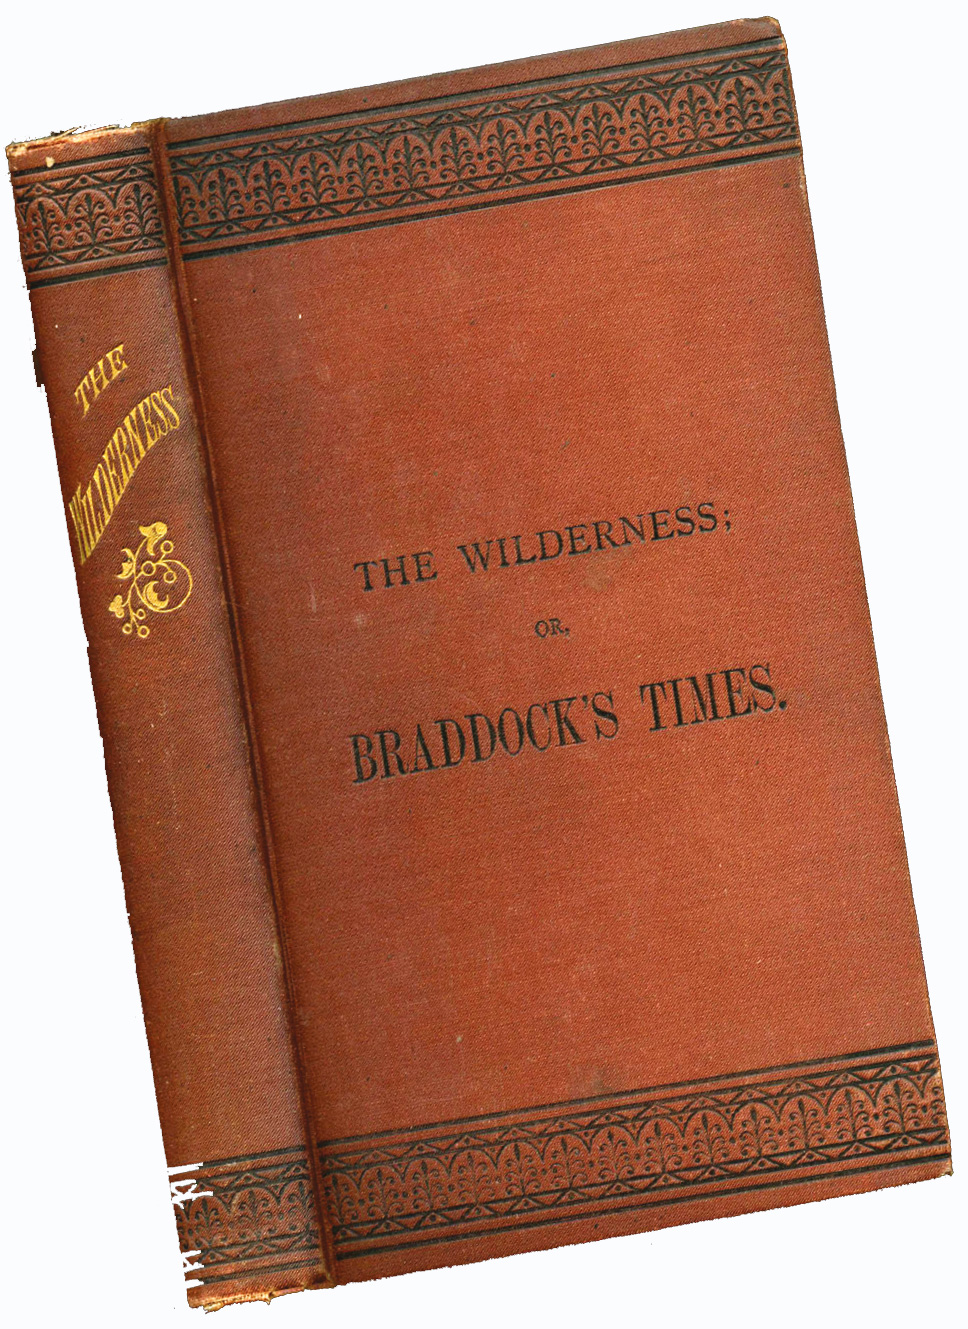 James McHenry’s The Wilderness, or the Youthful Days of Washington (1823)